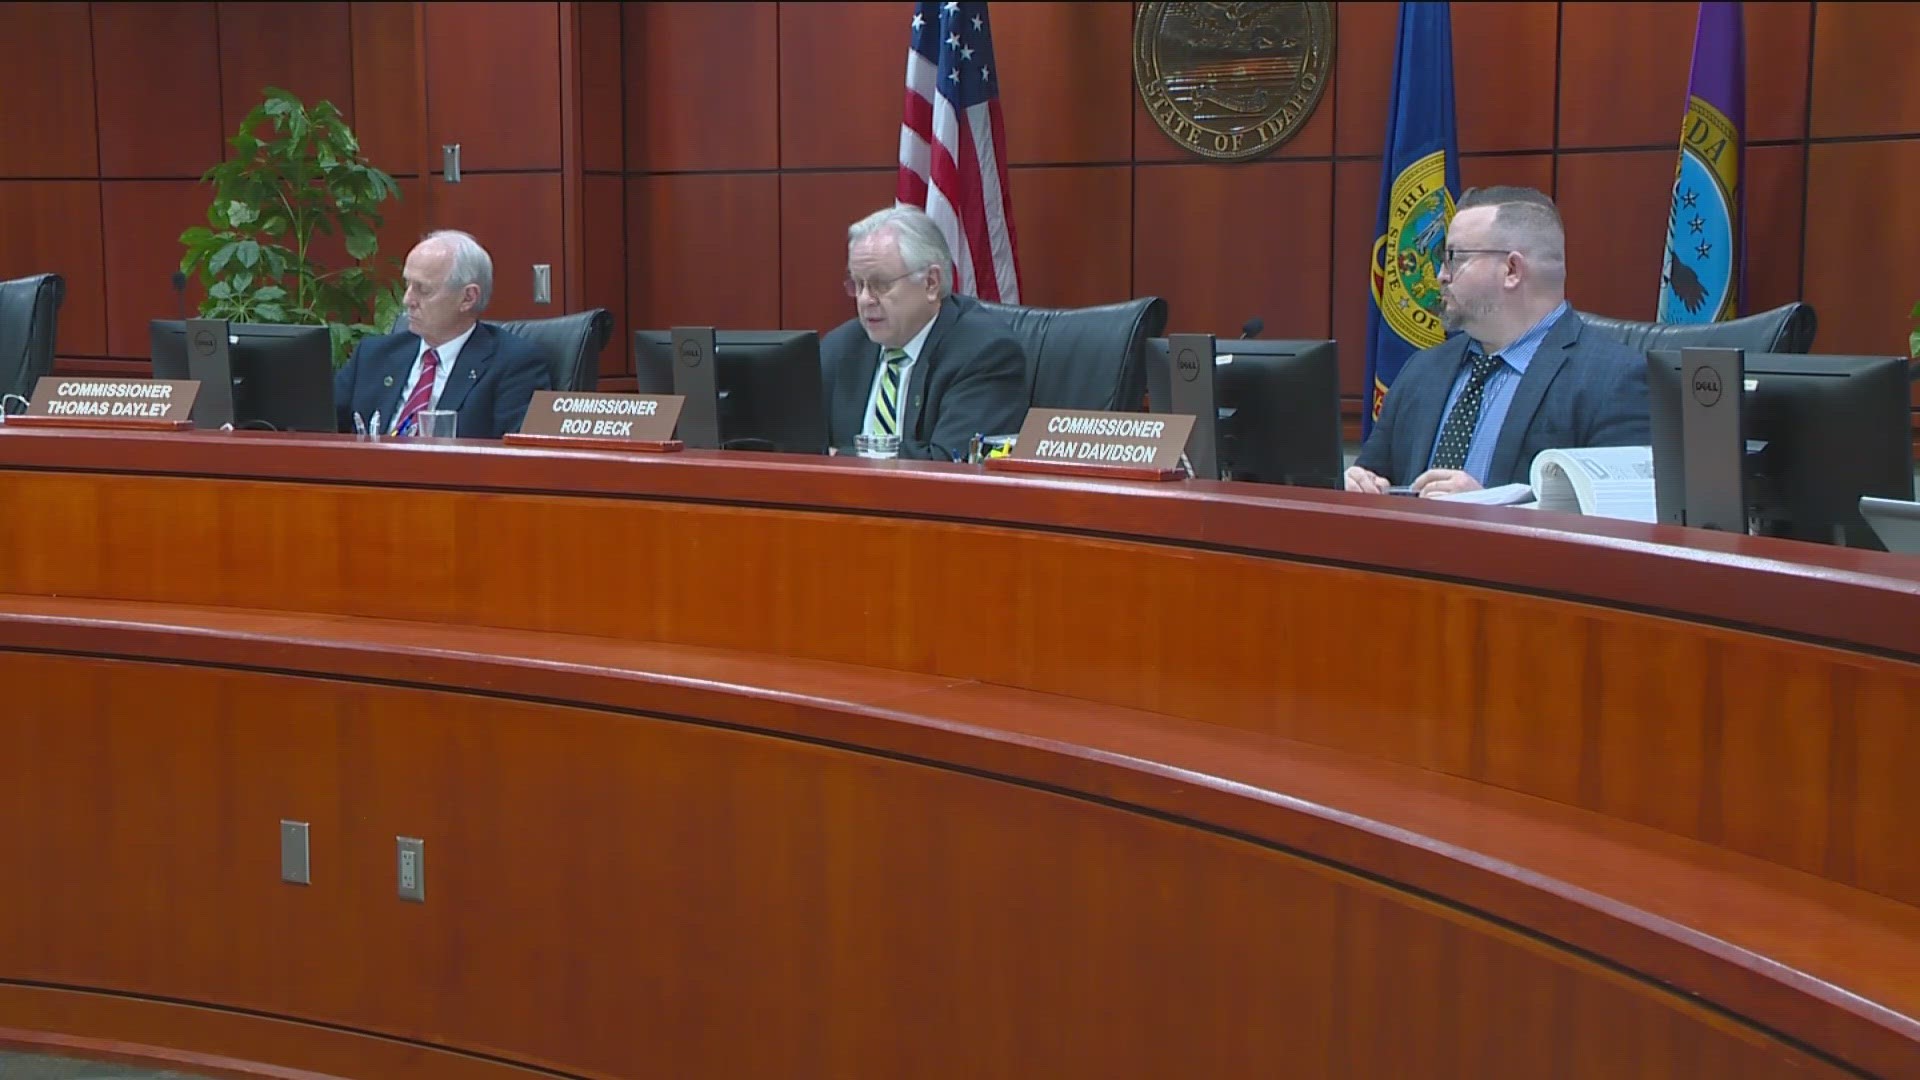 After hearing from hundreds of community members, Ada County Commissioners are scheduled to meet March 29 to decide if the issue should be up for a vote in November.